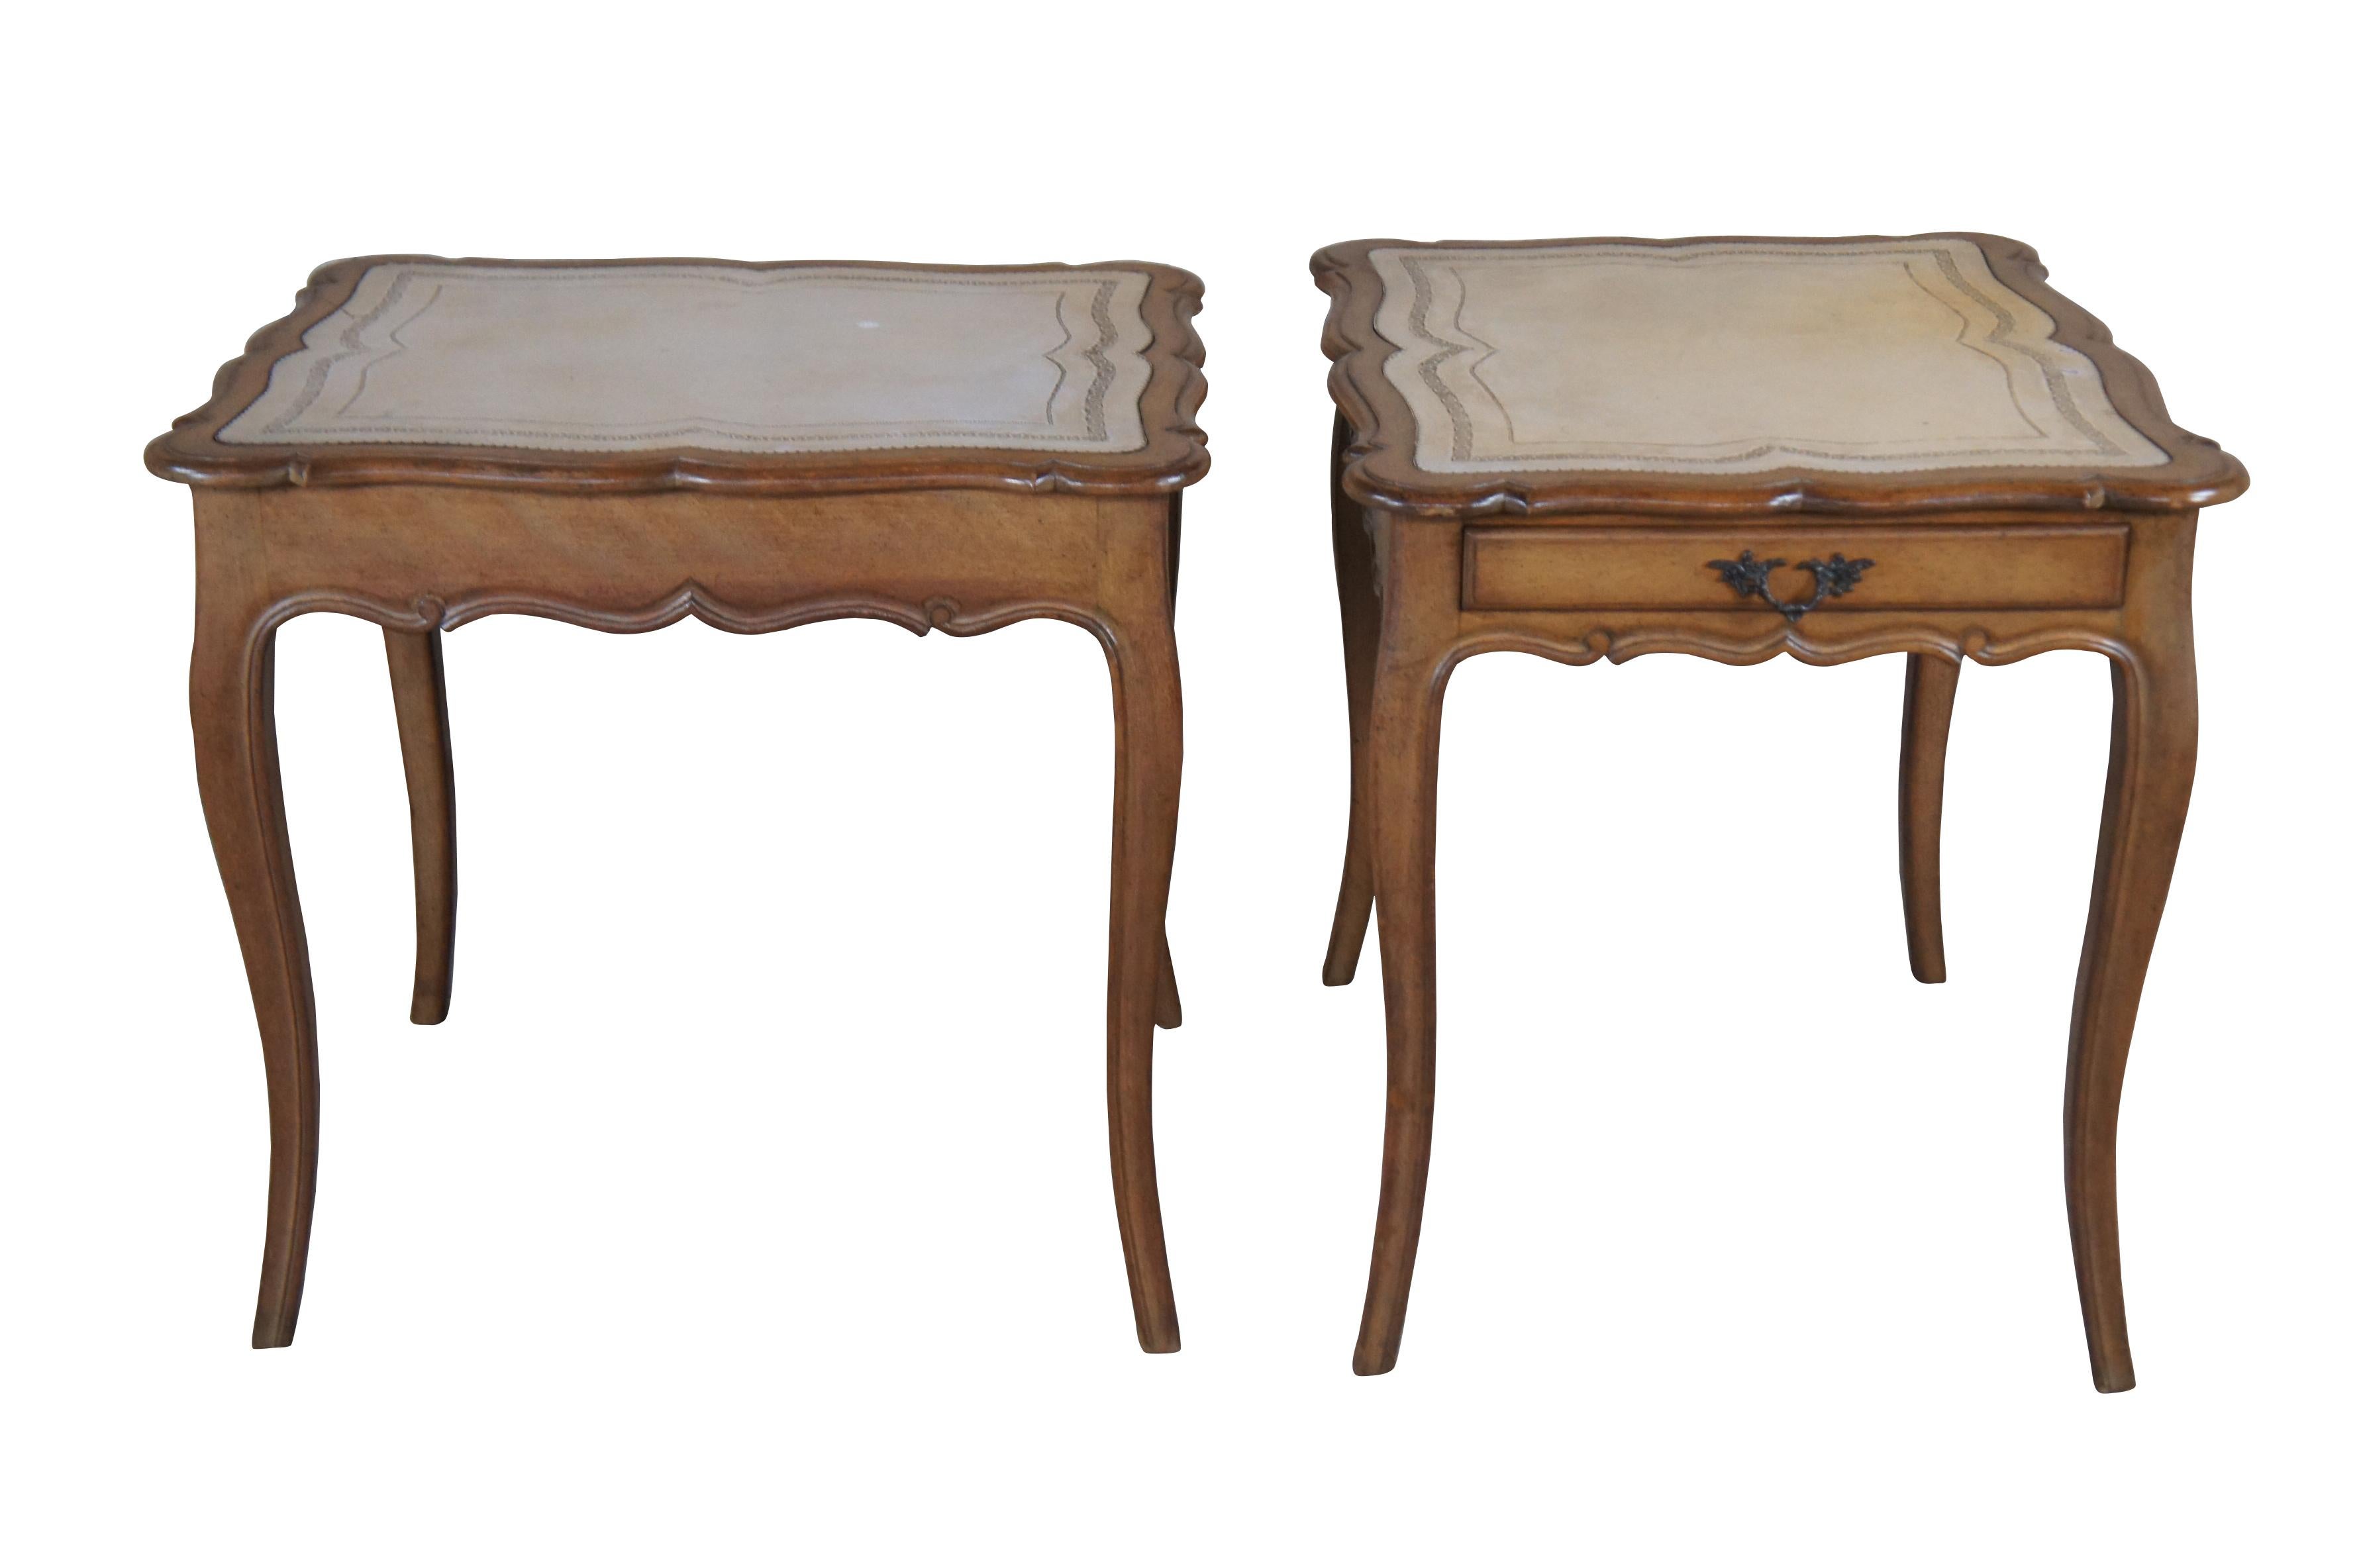 Two vintage French Provincial / Louis XV style side accent tables, circa 1960s.  Made of walnut featuring serpentine form with inlaid tooled leather top, slender dovetailed storage drawer and cabriole legs.

Dimensions:
24